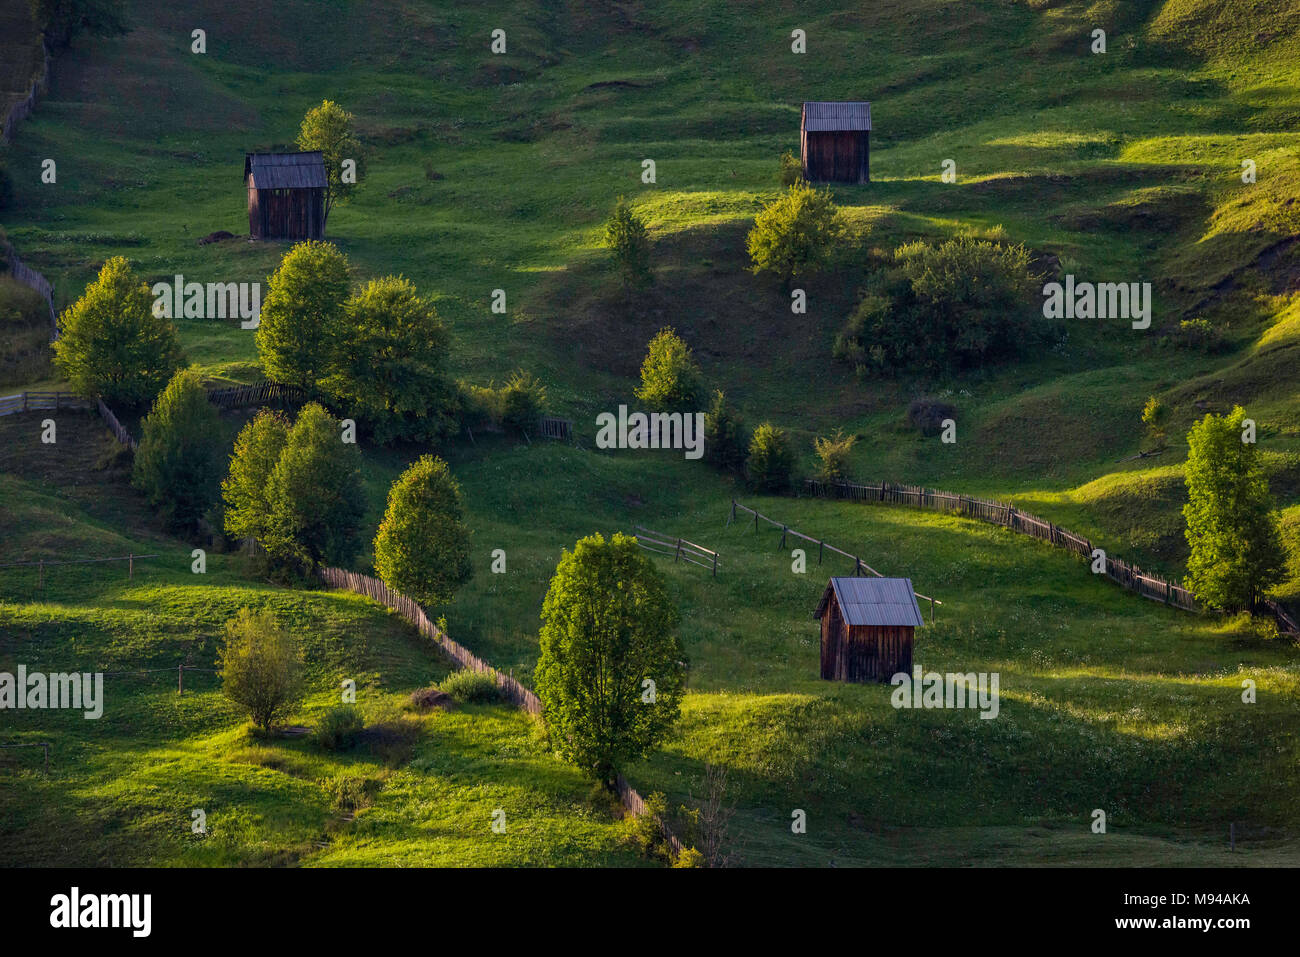 The idyllic scenery of the Bucovina region in Romania with green rolling hills and cottages in the sunset light Stock Photo